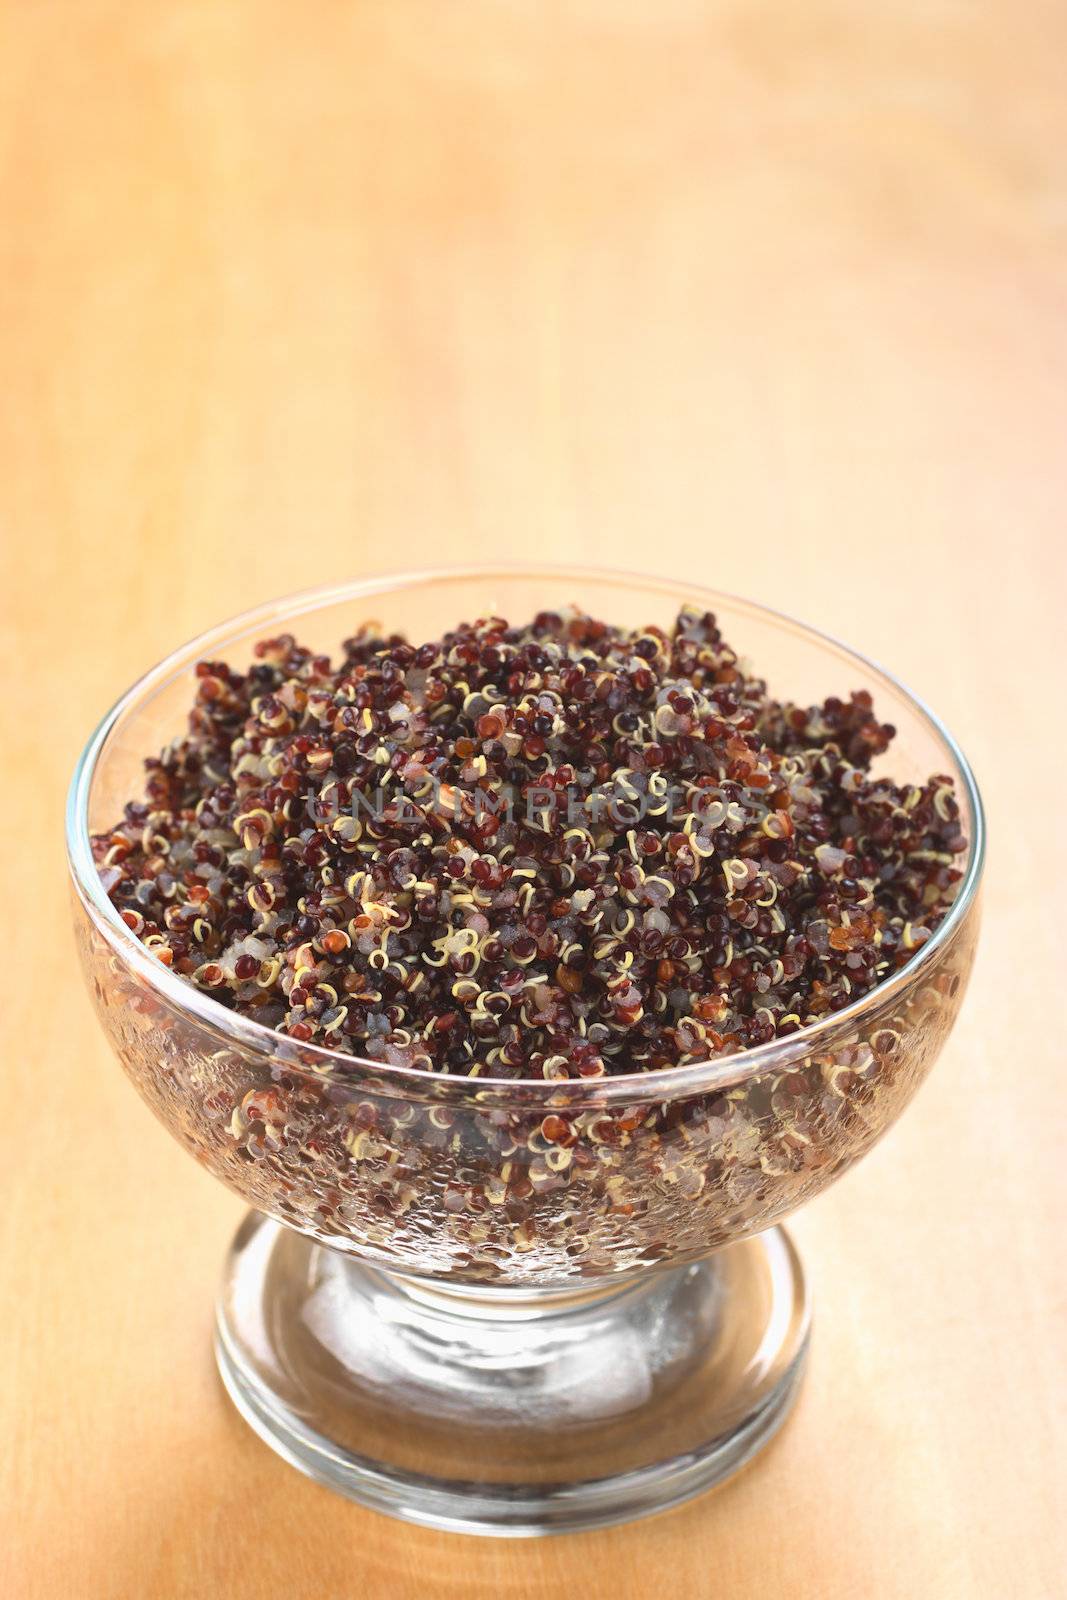 Cooked red quinoa in glass bowl which can be eaten as a side dish like rice and is rich in proteins (Selective Focus, Focus on the front of the quinoa) 